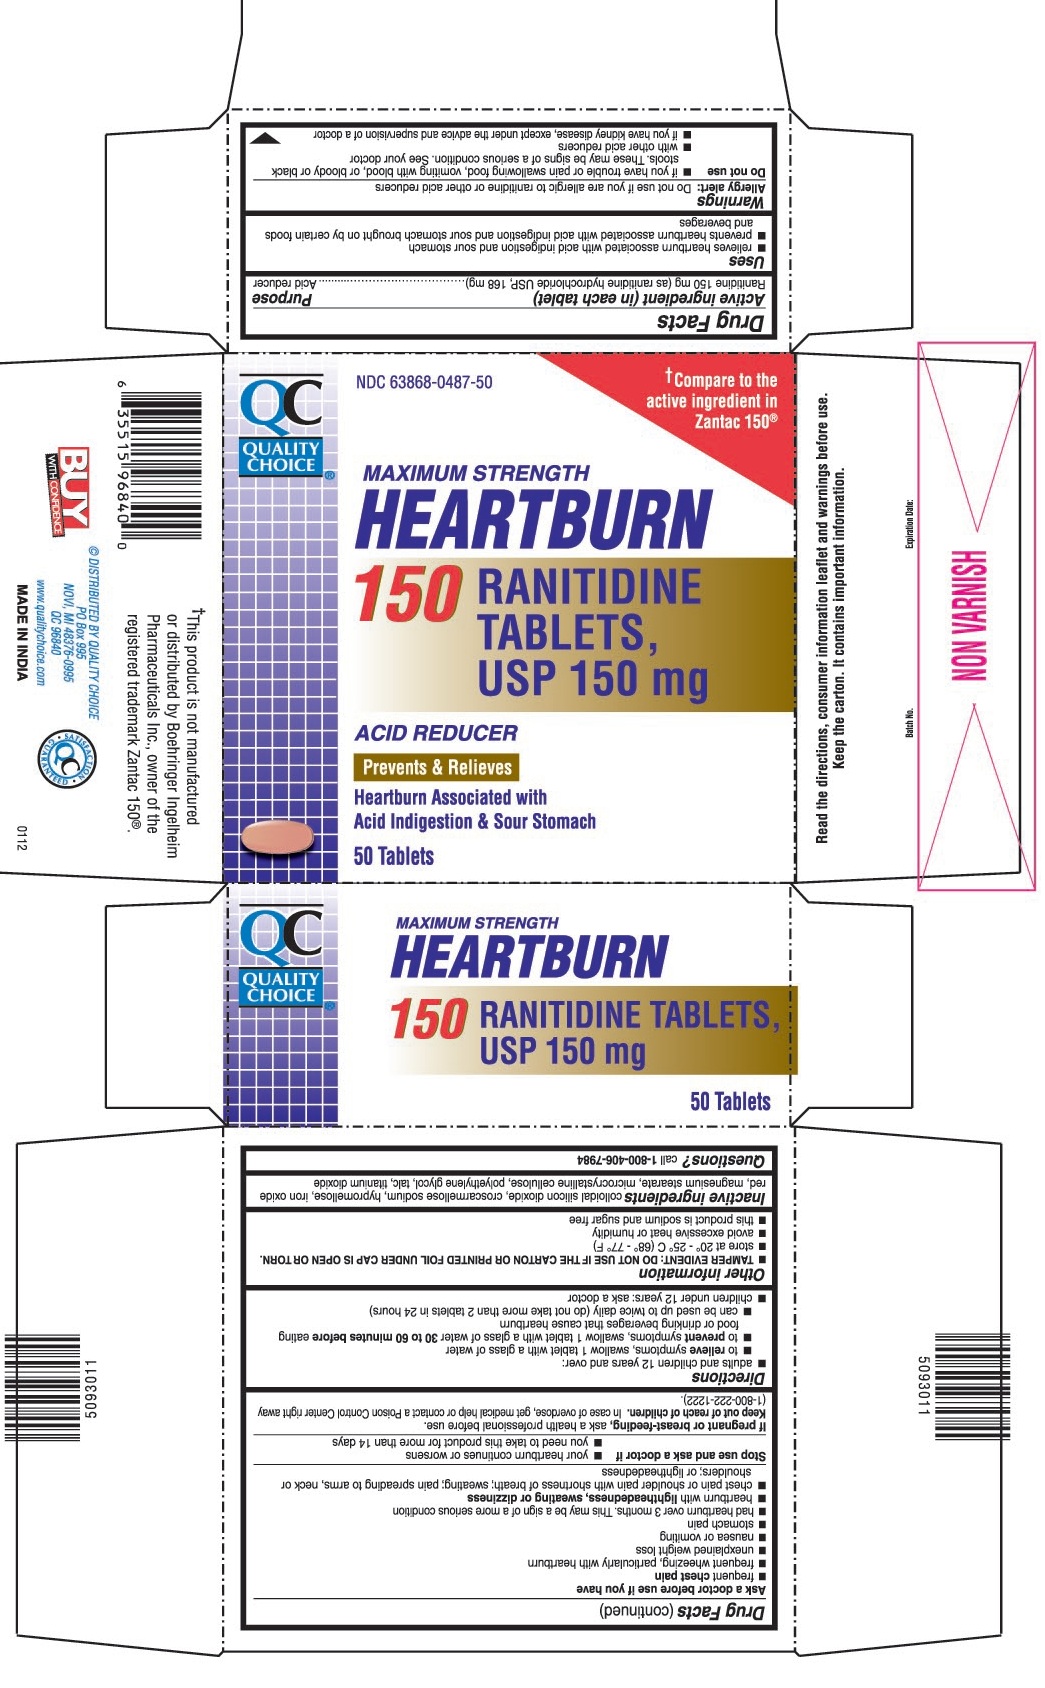 This is the 50 count bottle carton label for Quality Choice Ranitidine tablets, USP 150 mg.